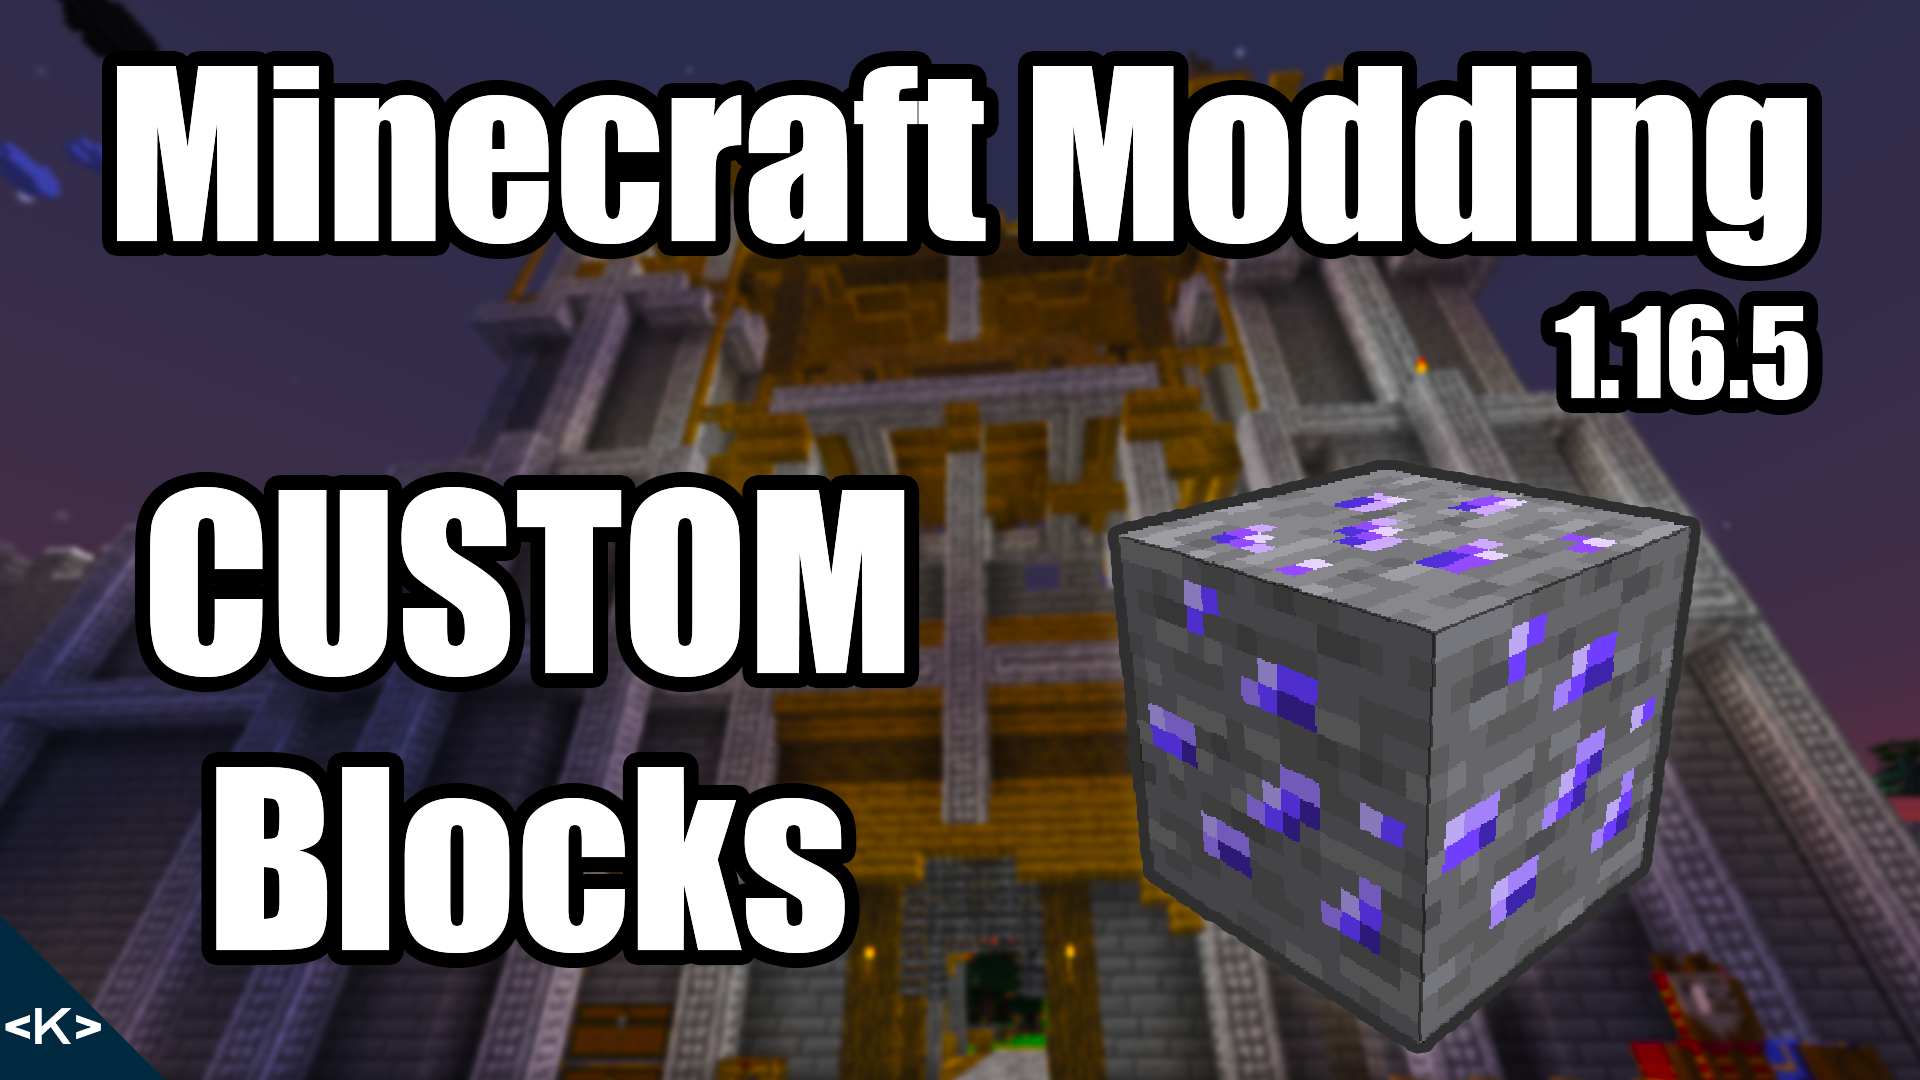 CUSTOM BLOCK added to Minecraft with Forge